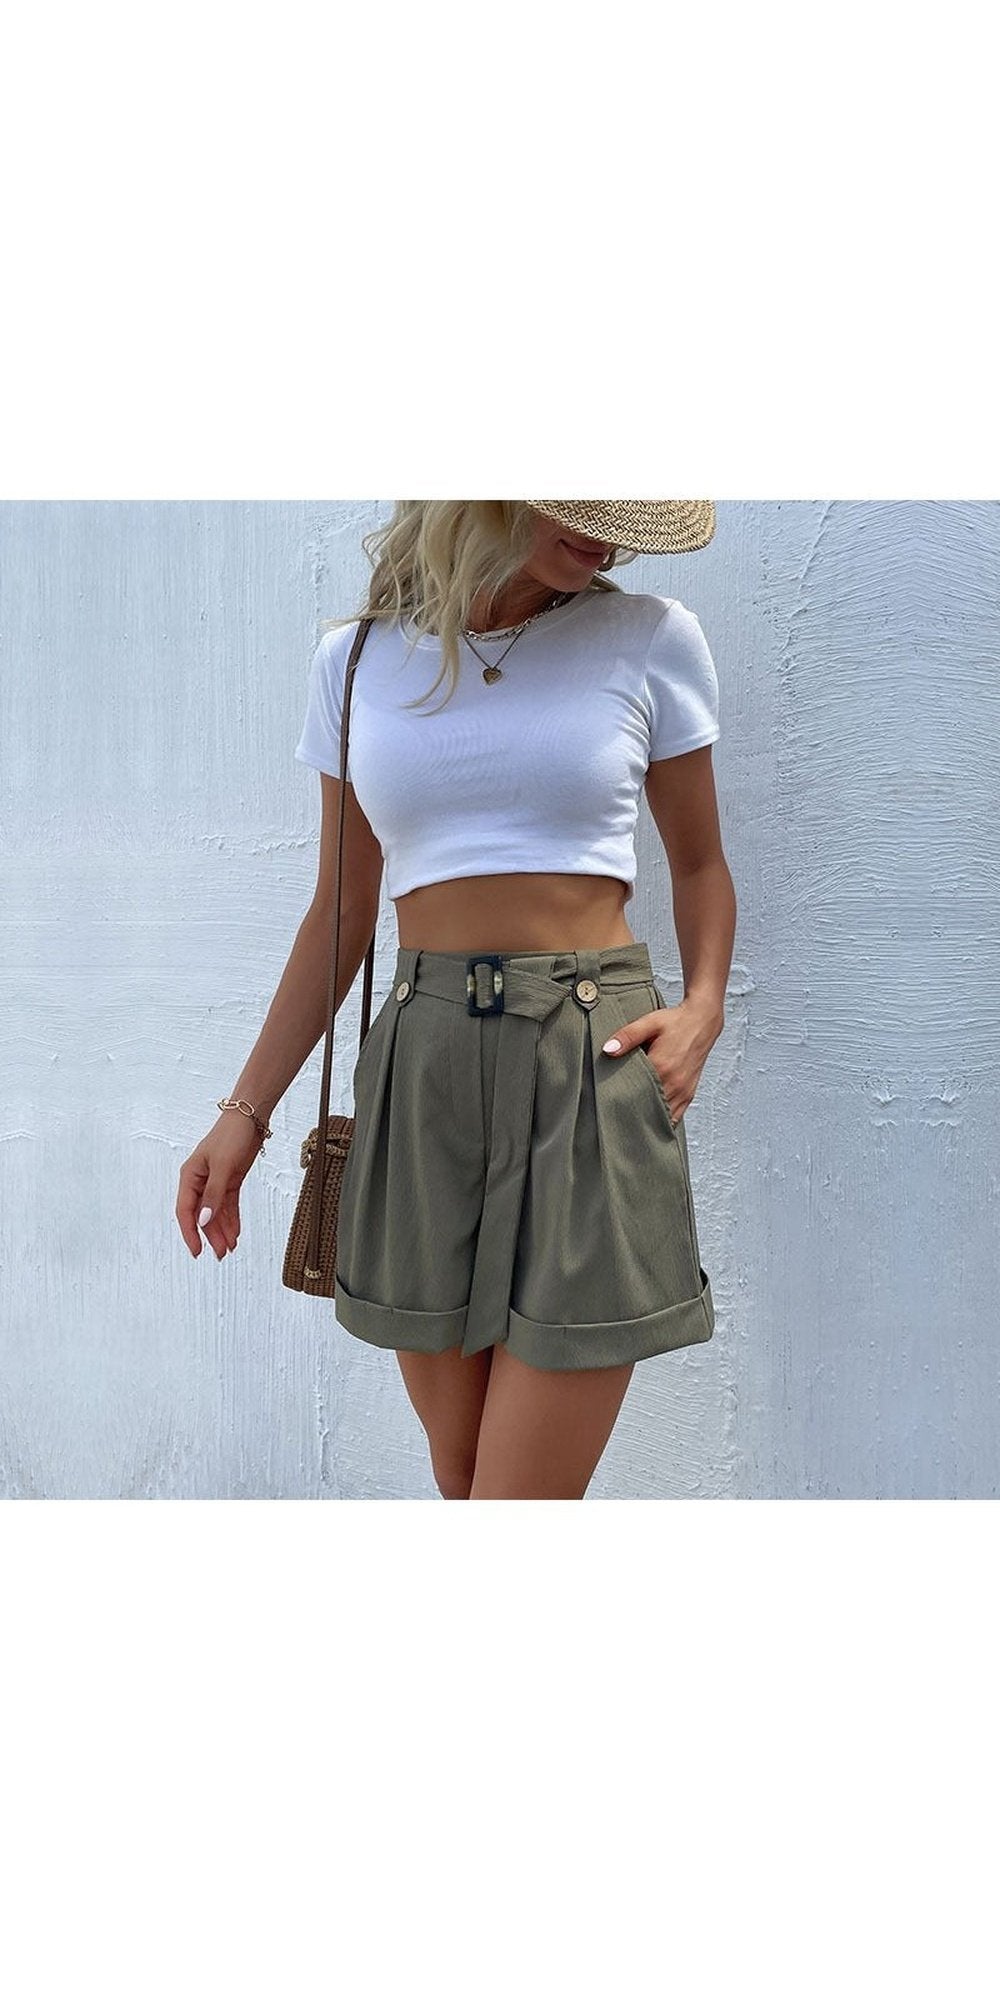 Fashion Summer Casual Green Shorts For Women With Belt -